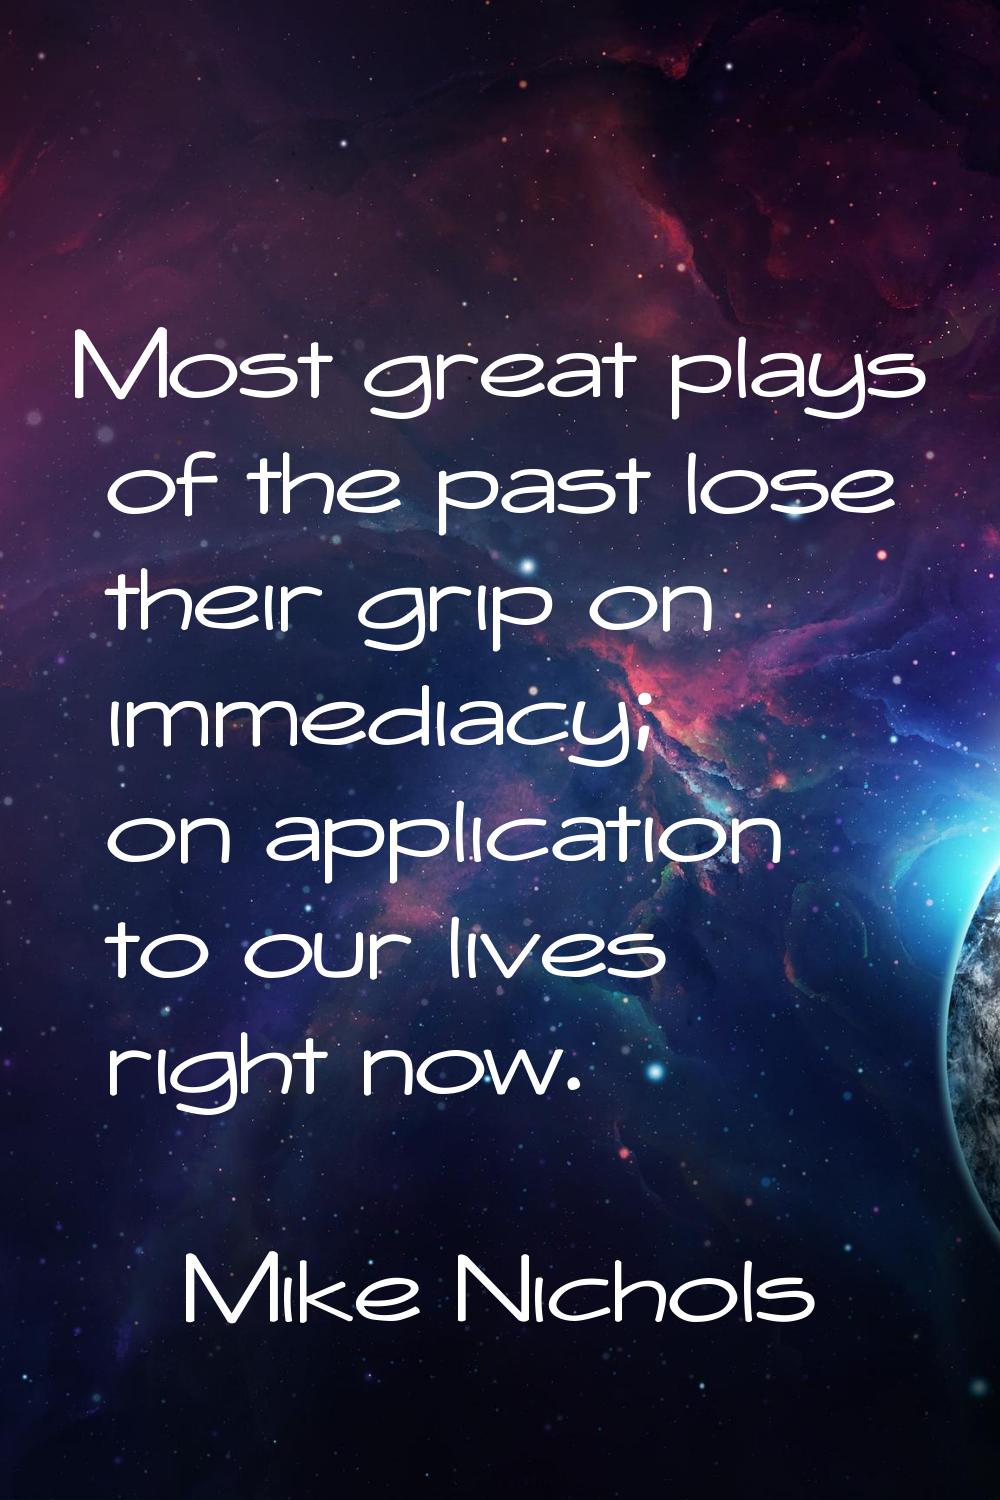 Most great plays of the past lose their grip on immediacy; on application to our lives right now.